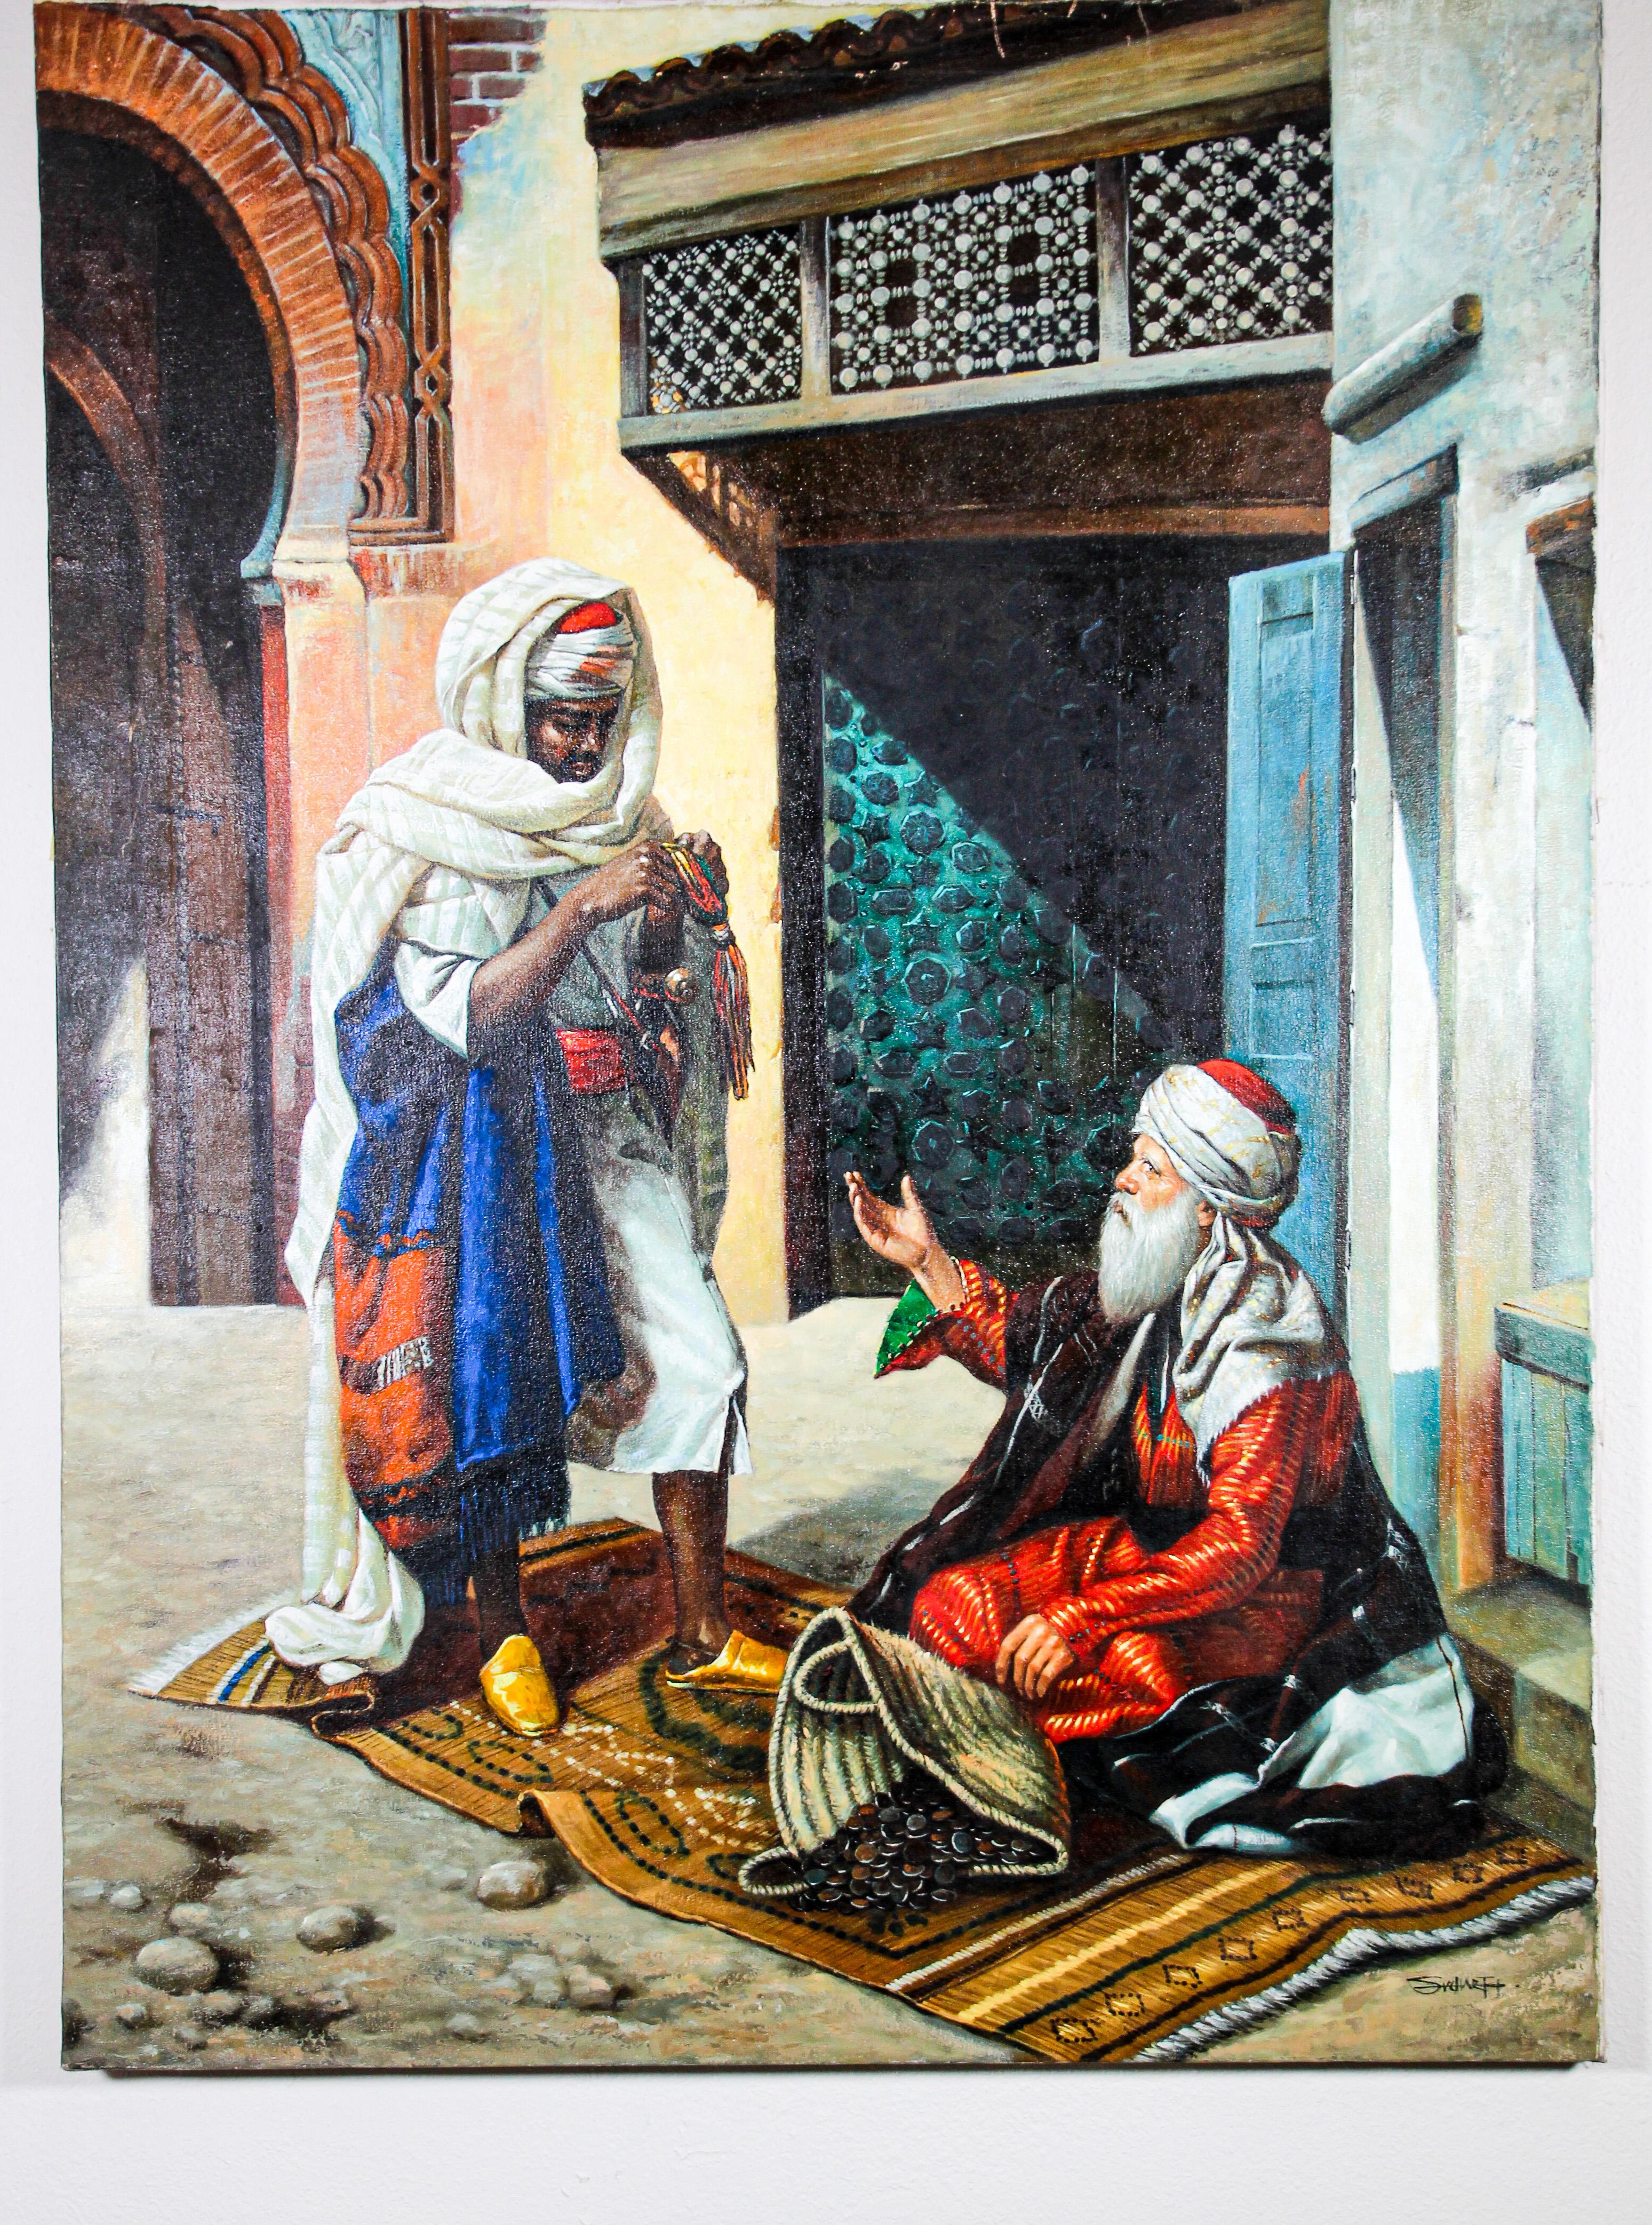 Moroccan Orientalist oil on canvas painting of a 19th century Moroccan market scene with an old men seating on a carpet selling old coins and a Moorish men 
 standing and checking the goods.
The background depict an old house with wooden mucharabie